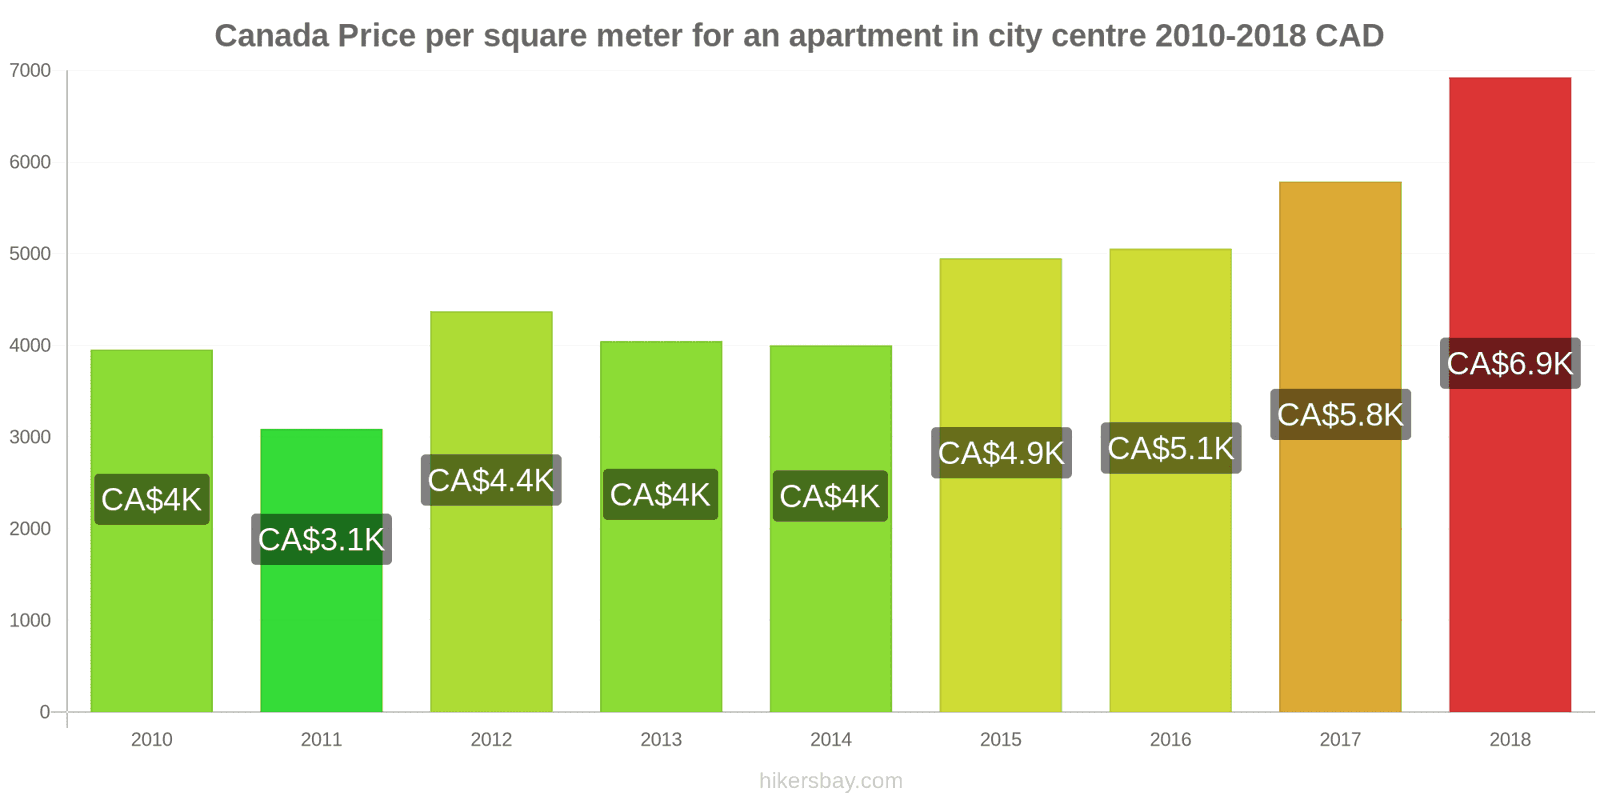 Canada price changes Price per square meter for an apartment in the city center hikersbay.com